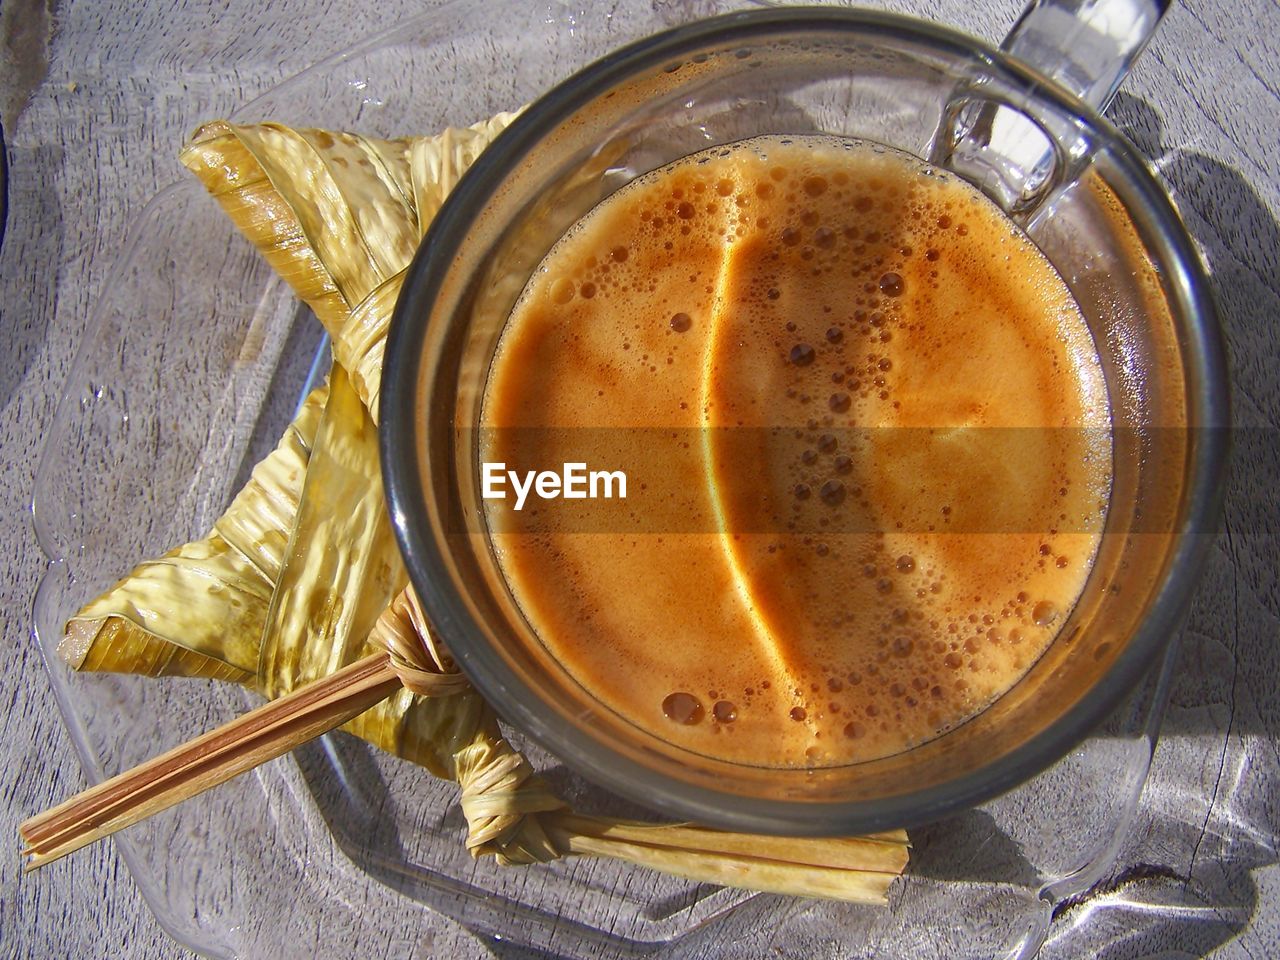 HIGH ANGLE VIEW OF COFFEE IN GLASS ON TABLE